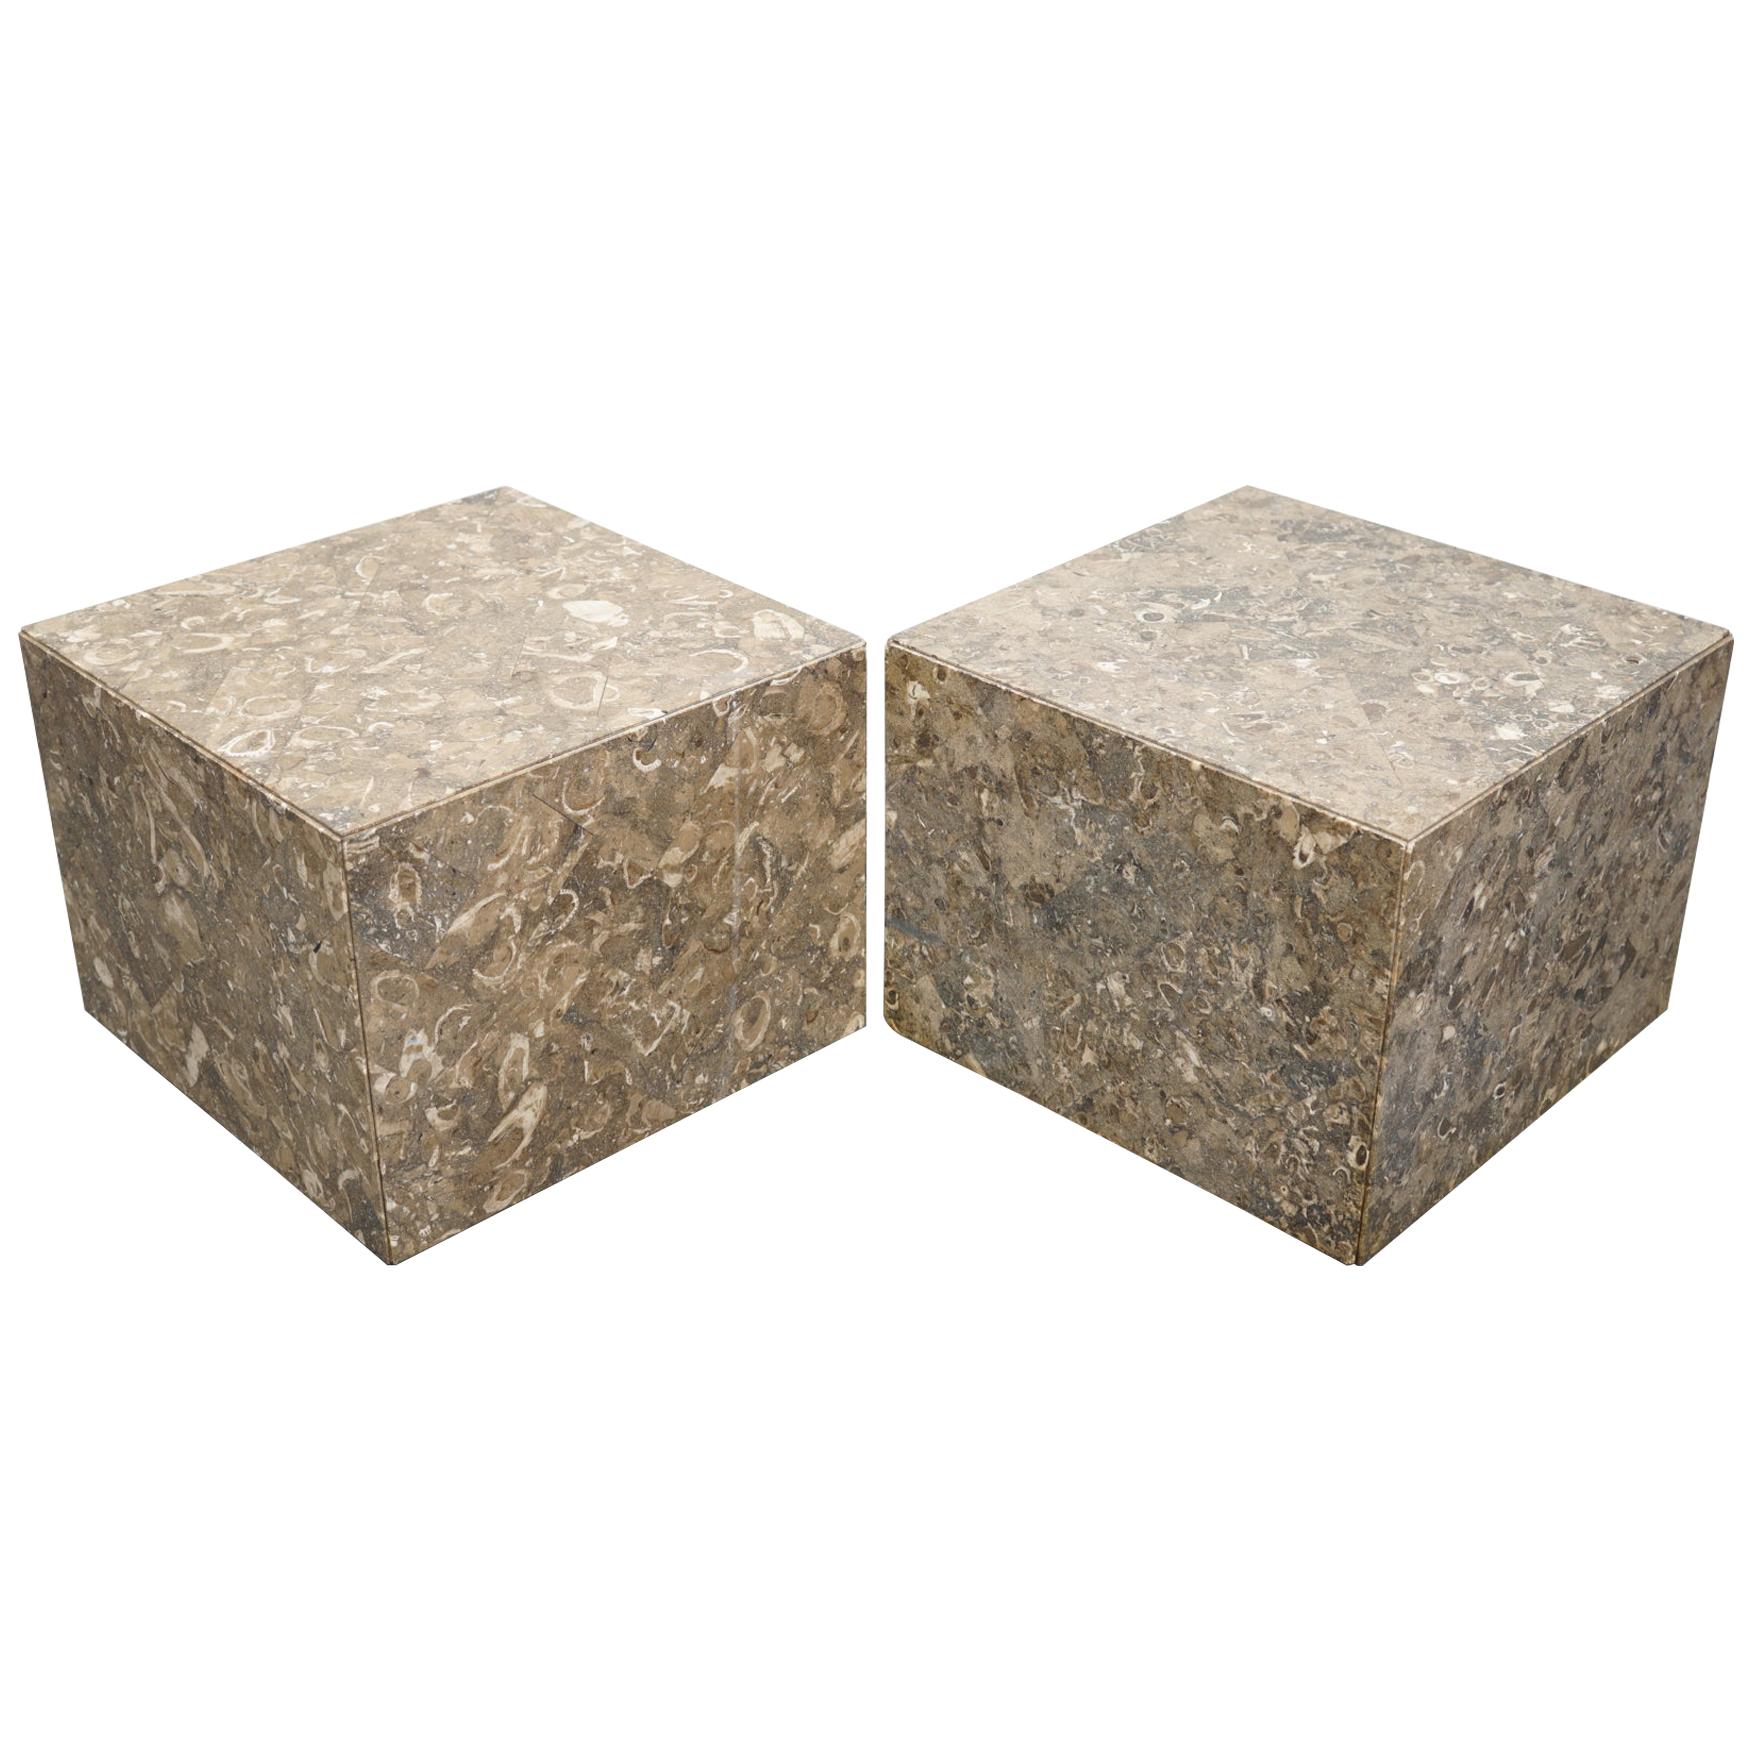 Pair of Italian Marble or Fossil Cube Side Tables